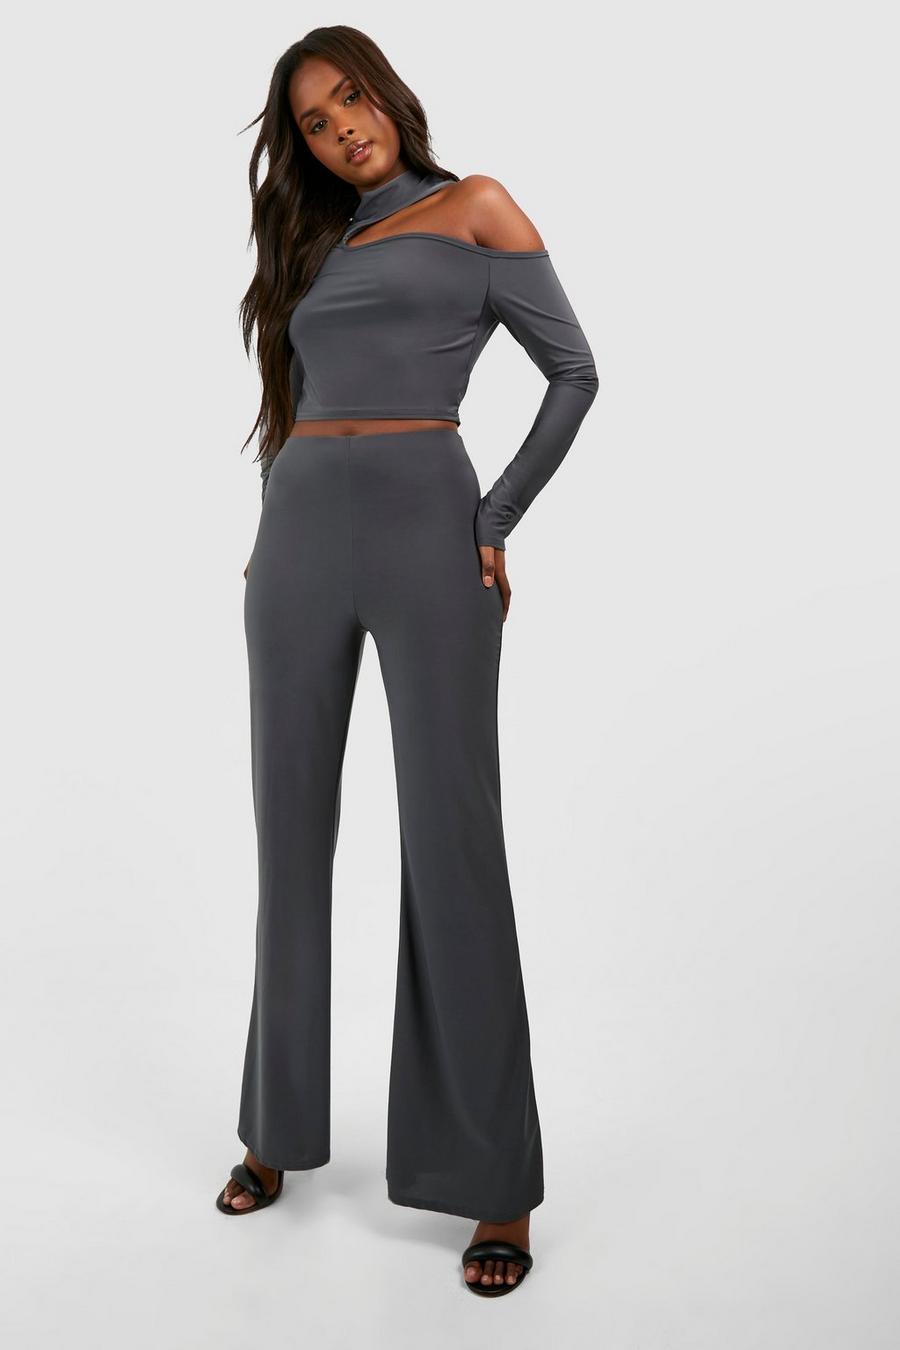 Slate High Neck Cut Out Long Sleeve Top & Flared Trouser